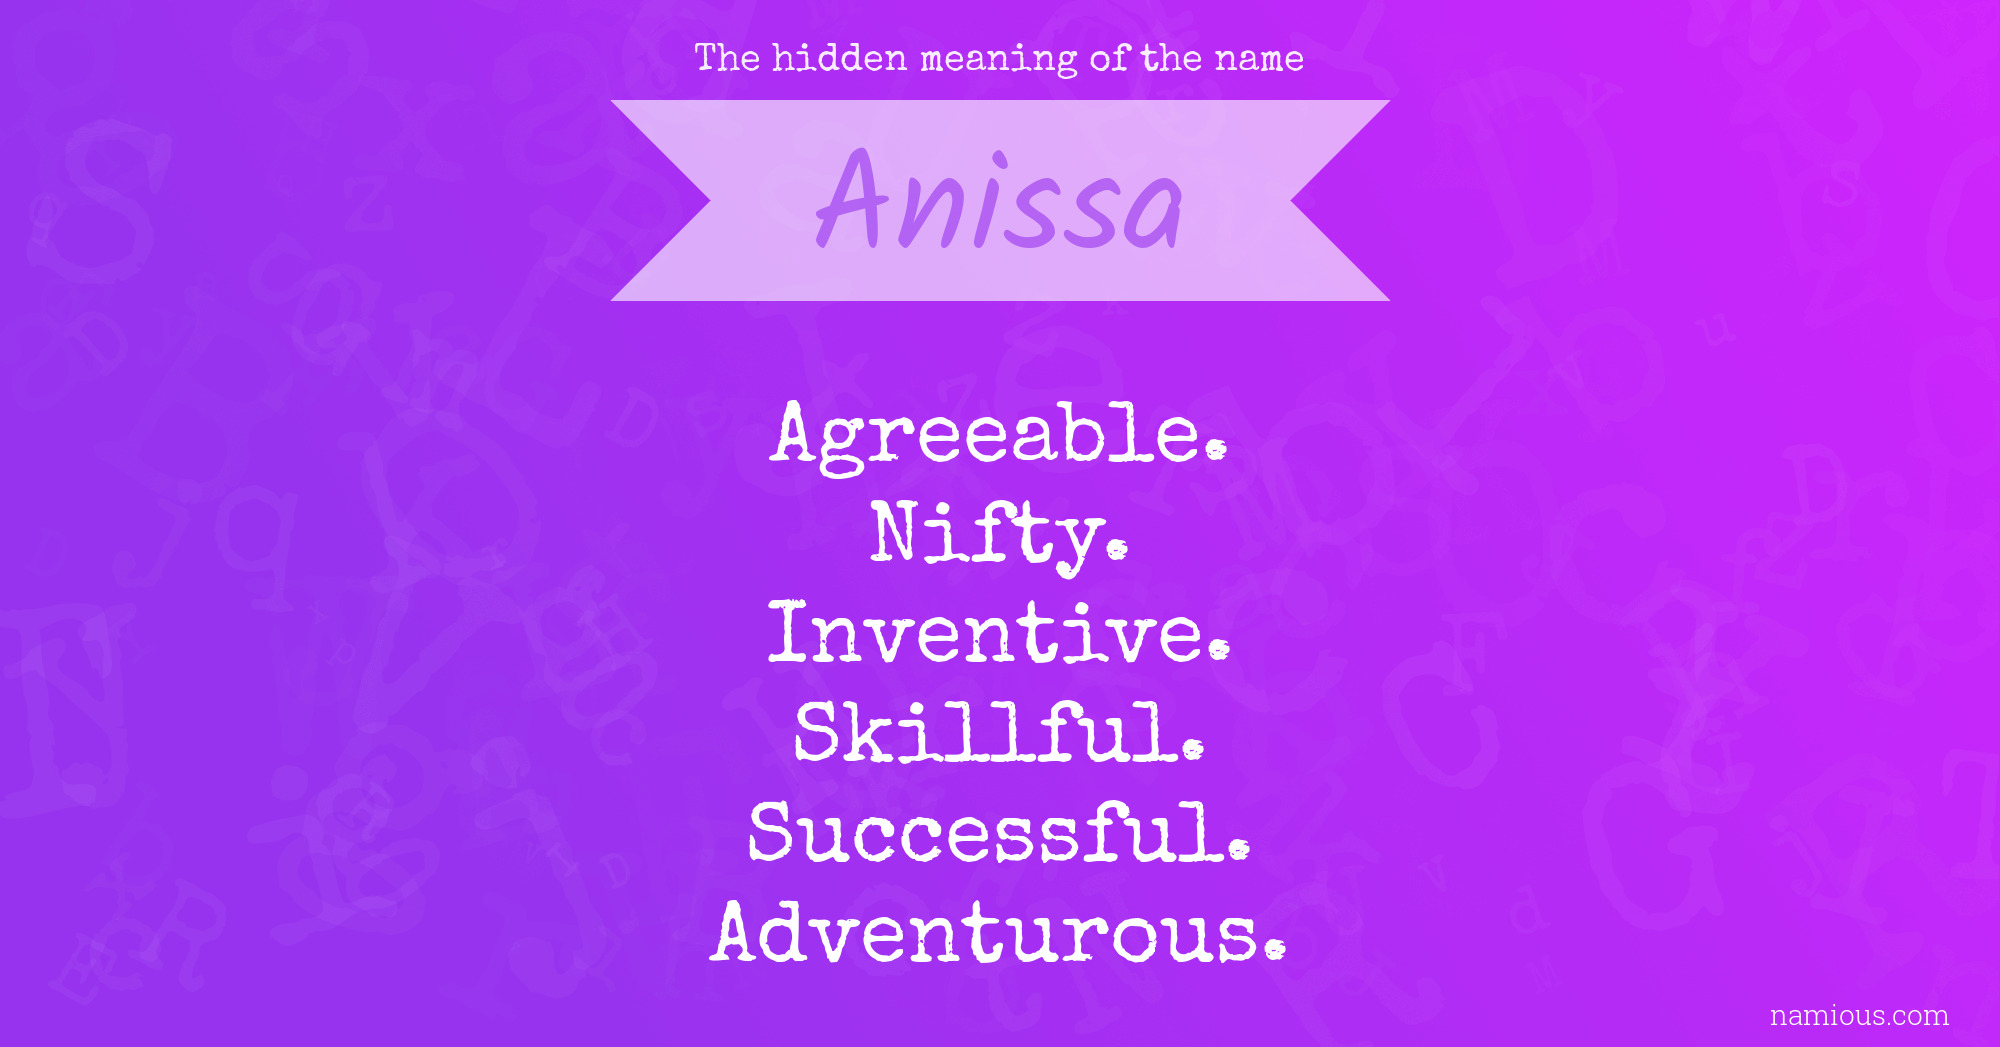 The hidden meaning of the name Anissa | Namious